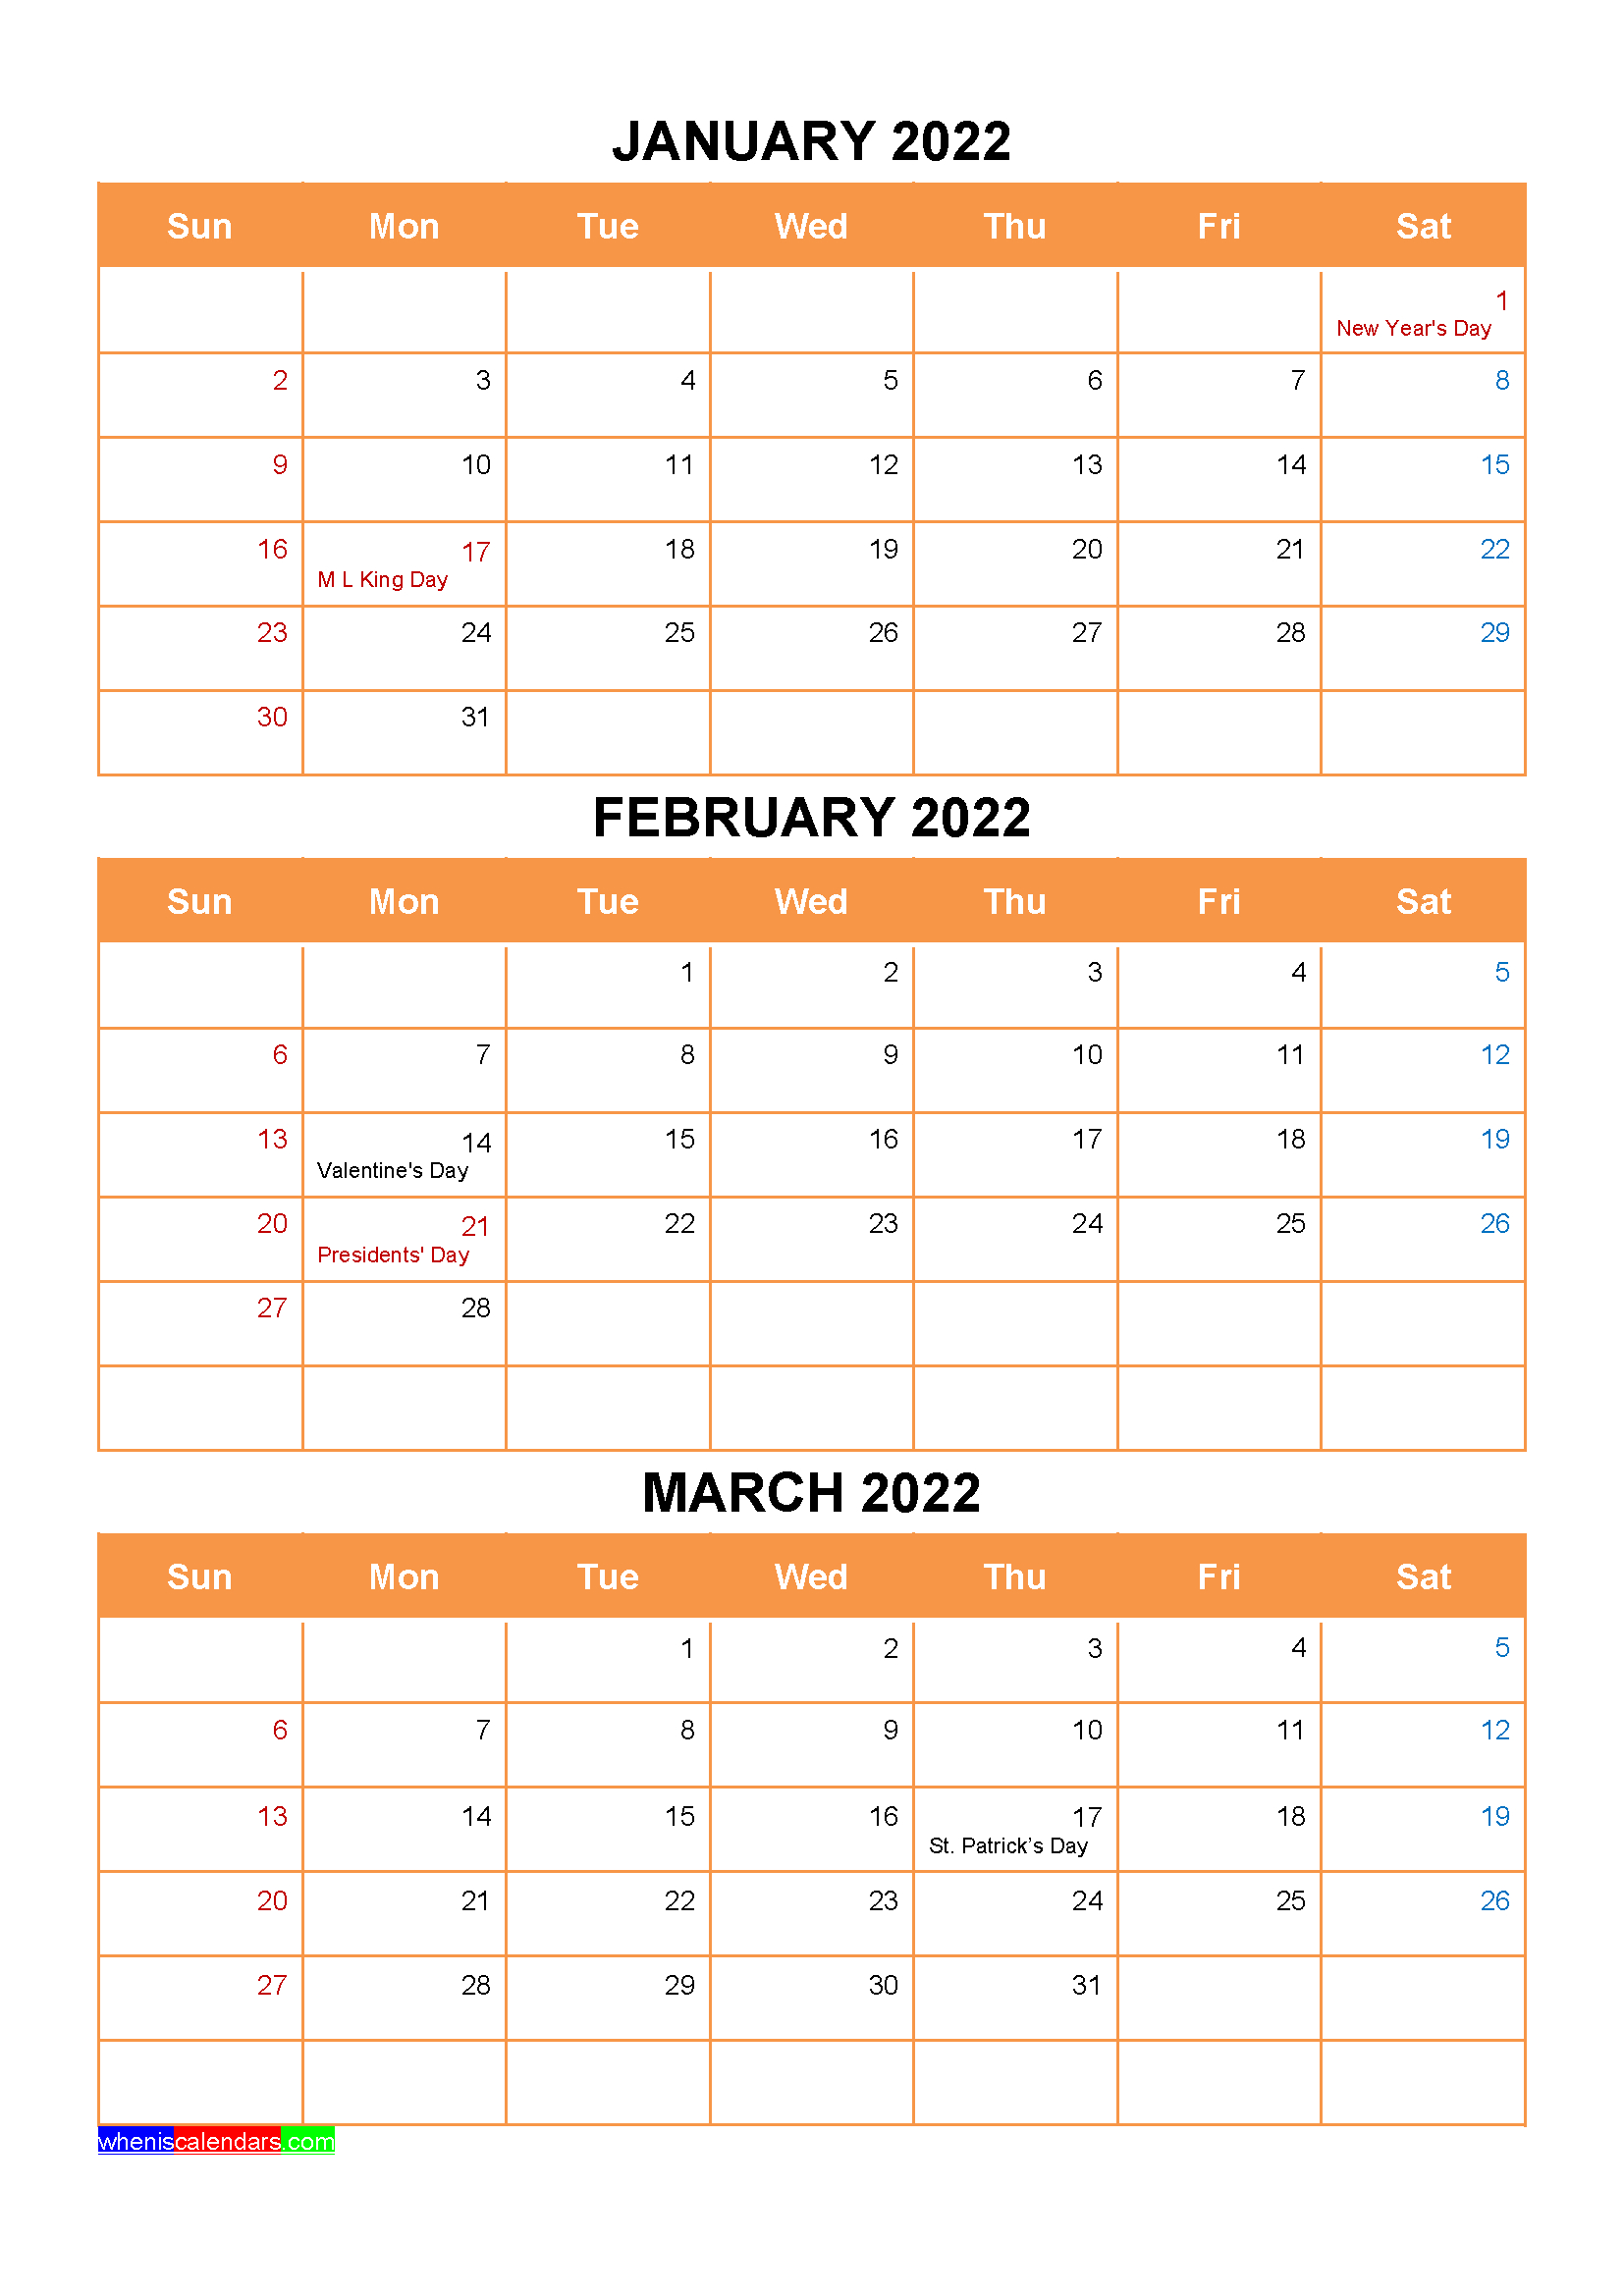 Catch Calendar Of January 2022 With Holidays